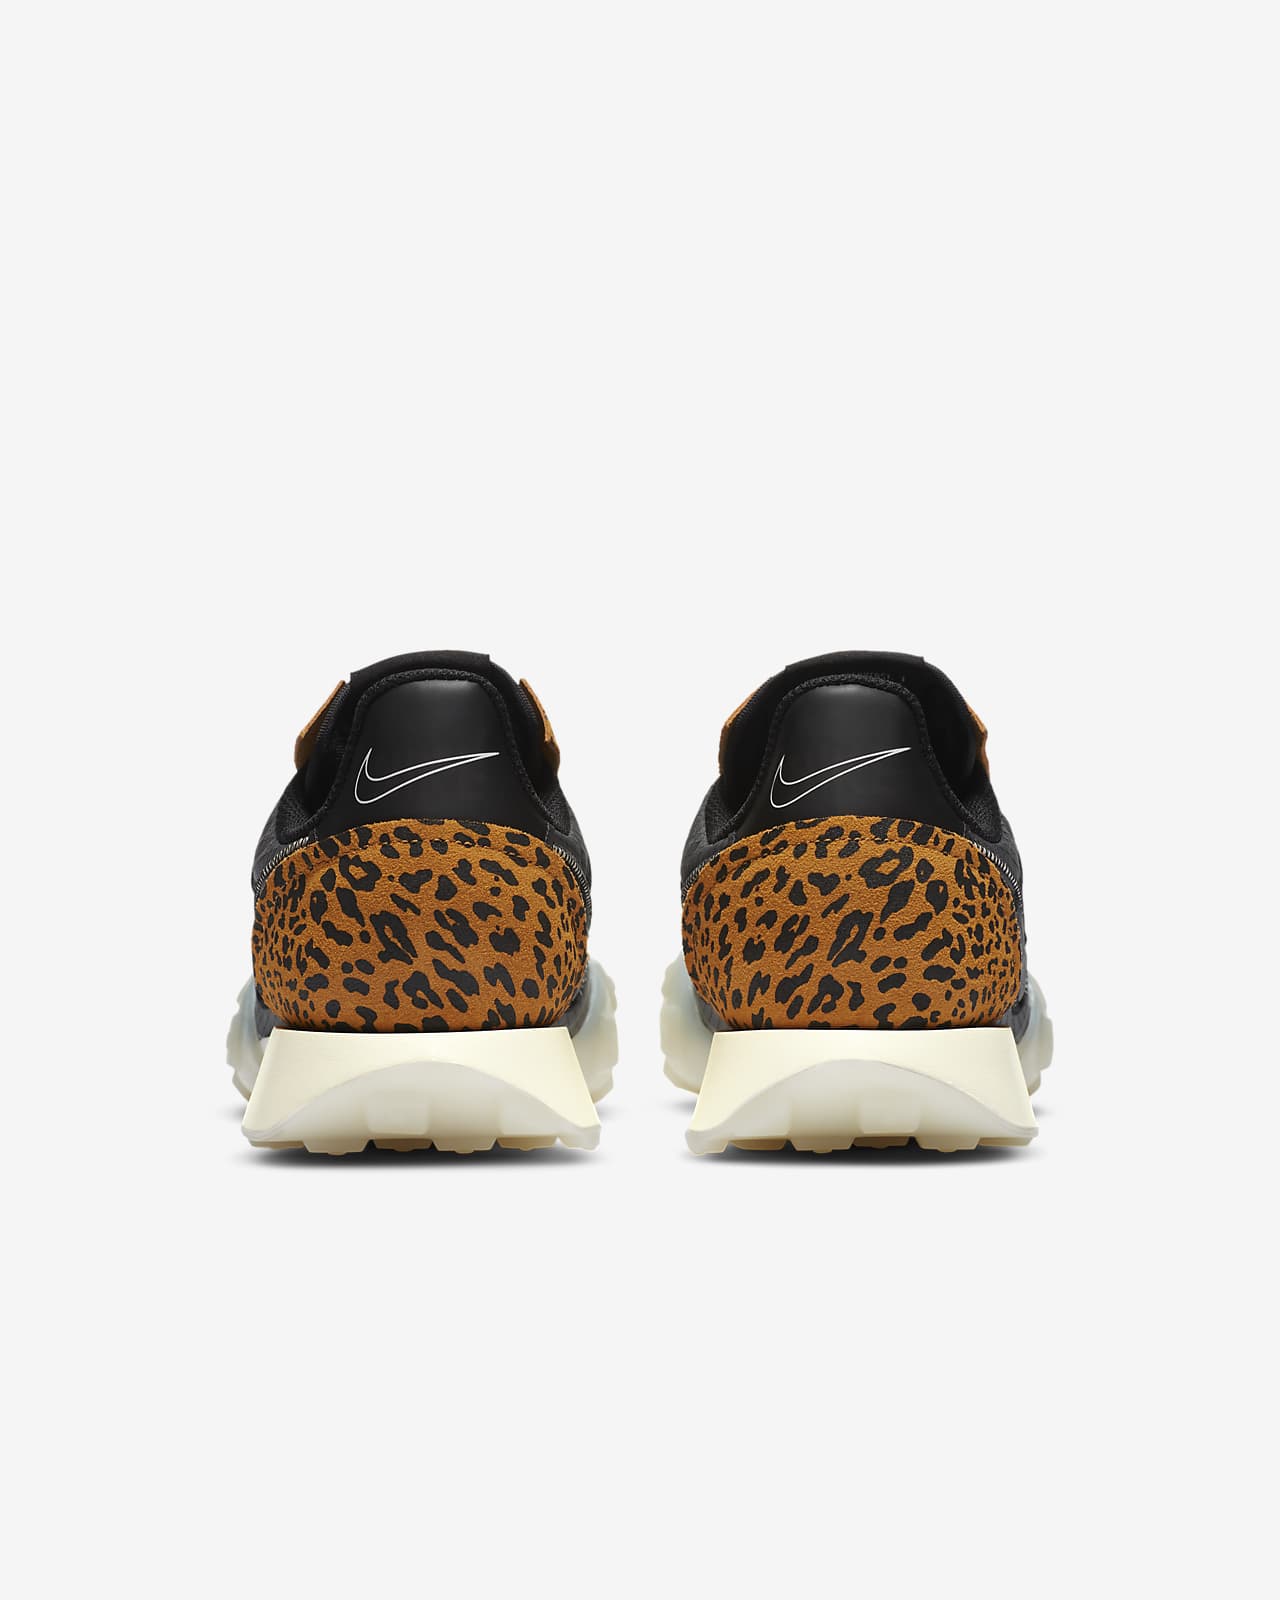 womens nike shoes with leopard print